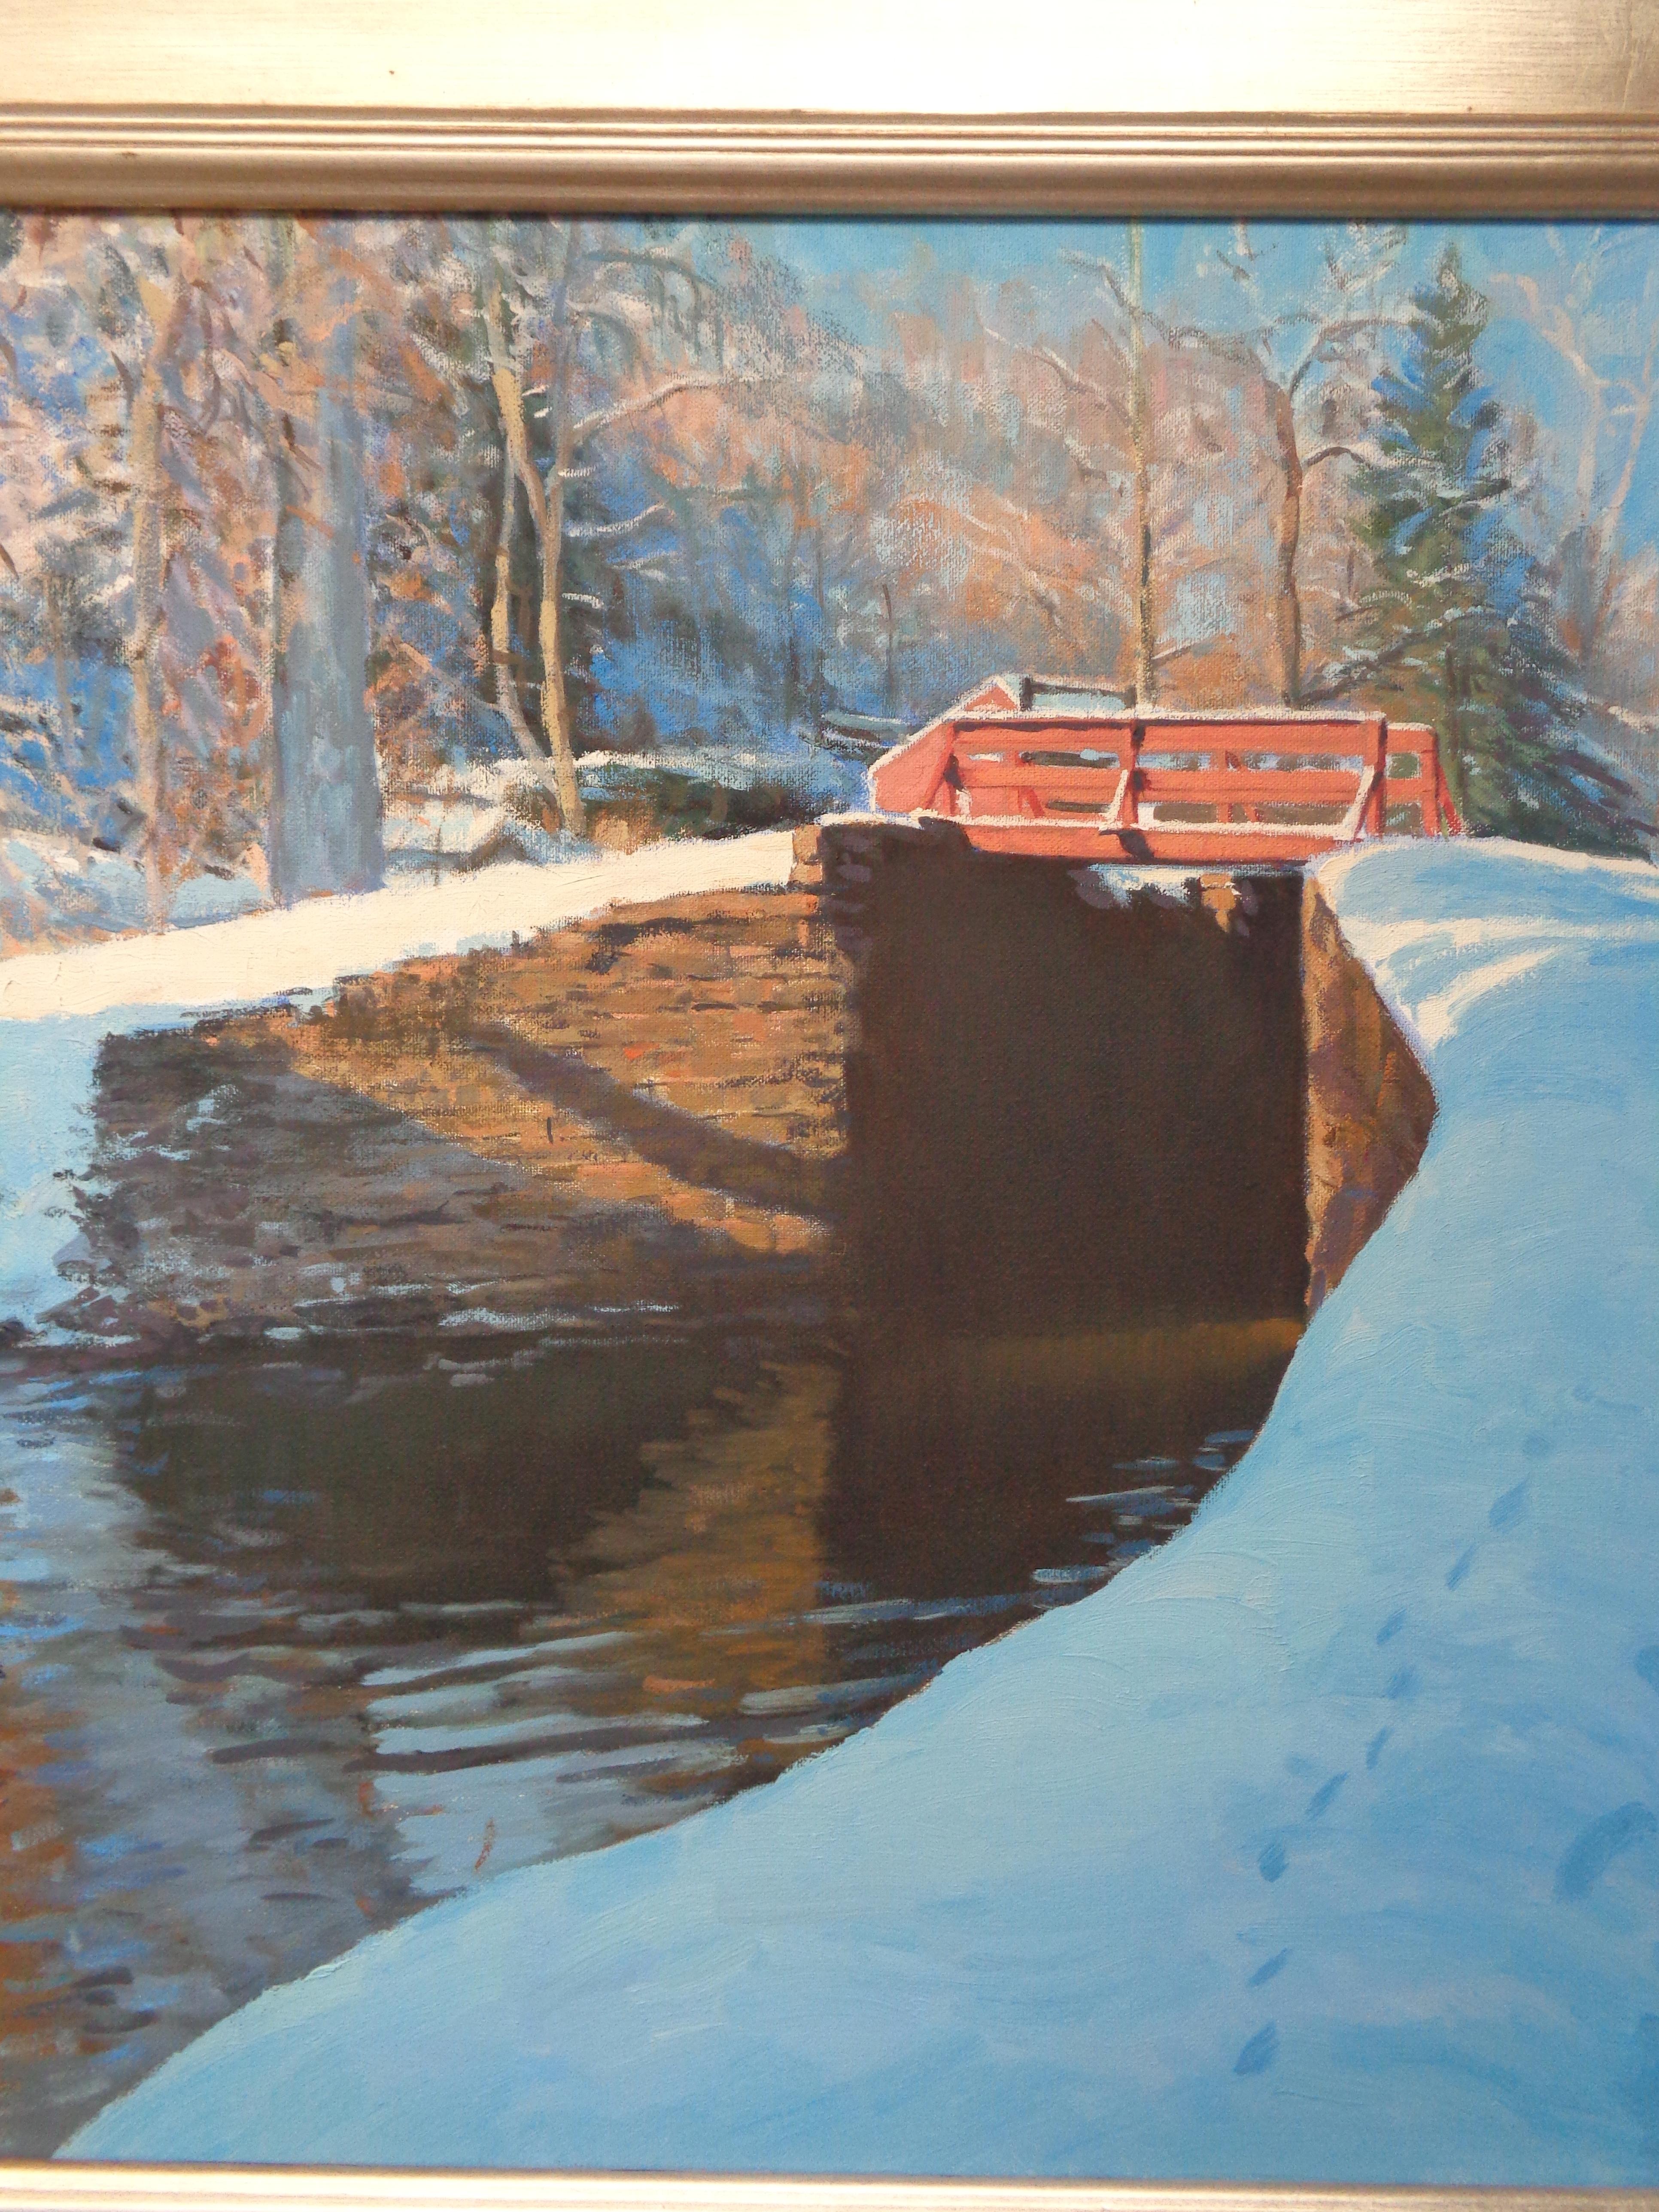 Winter Snow Scene Contemporary Bucks Co Landscape Oil Painting by Michael Budden For Sale 2